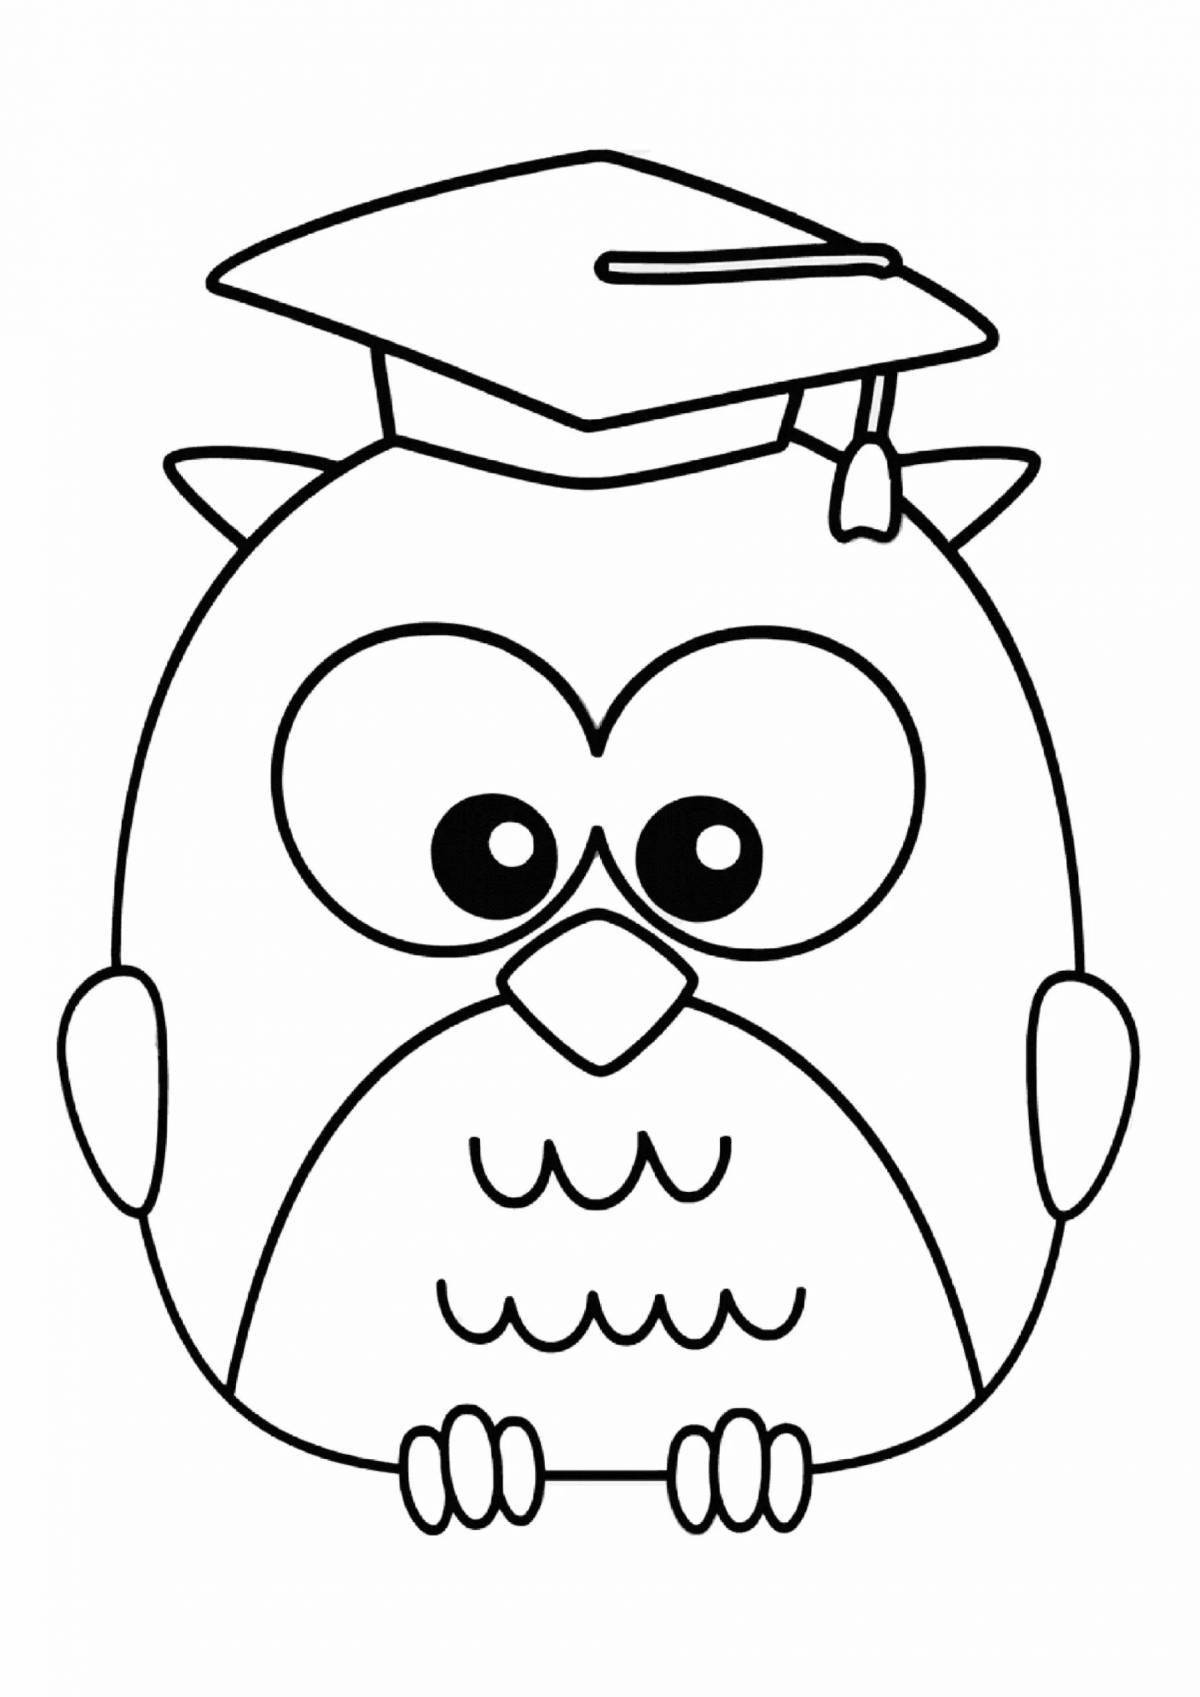 Coloring majestic wise owl